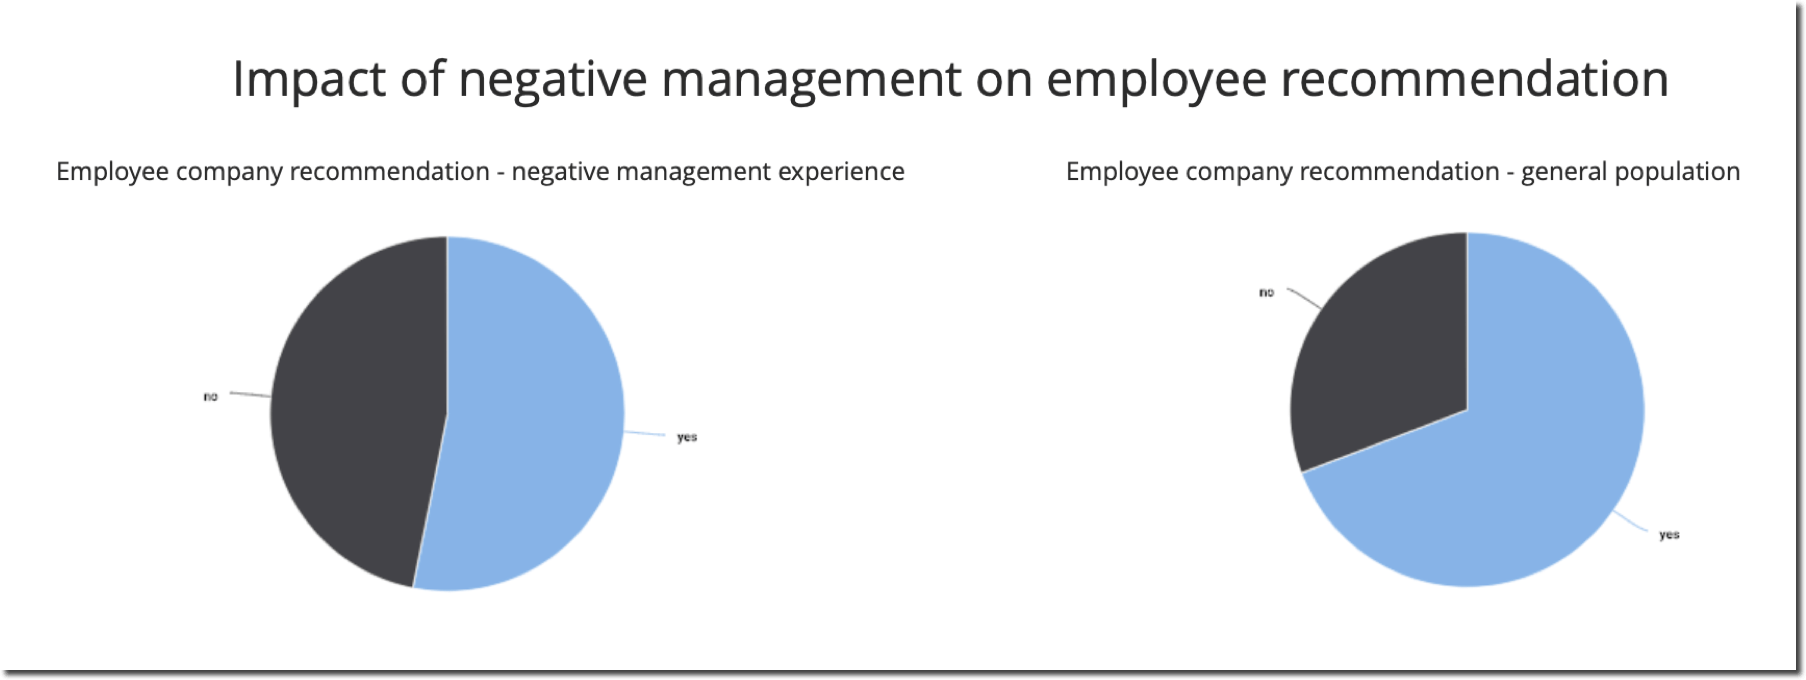 Voice of employee represented in two pie charts measuring the impact of negative management on an employee outlook of the company